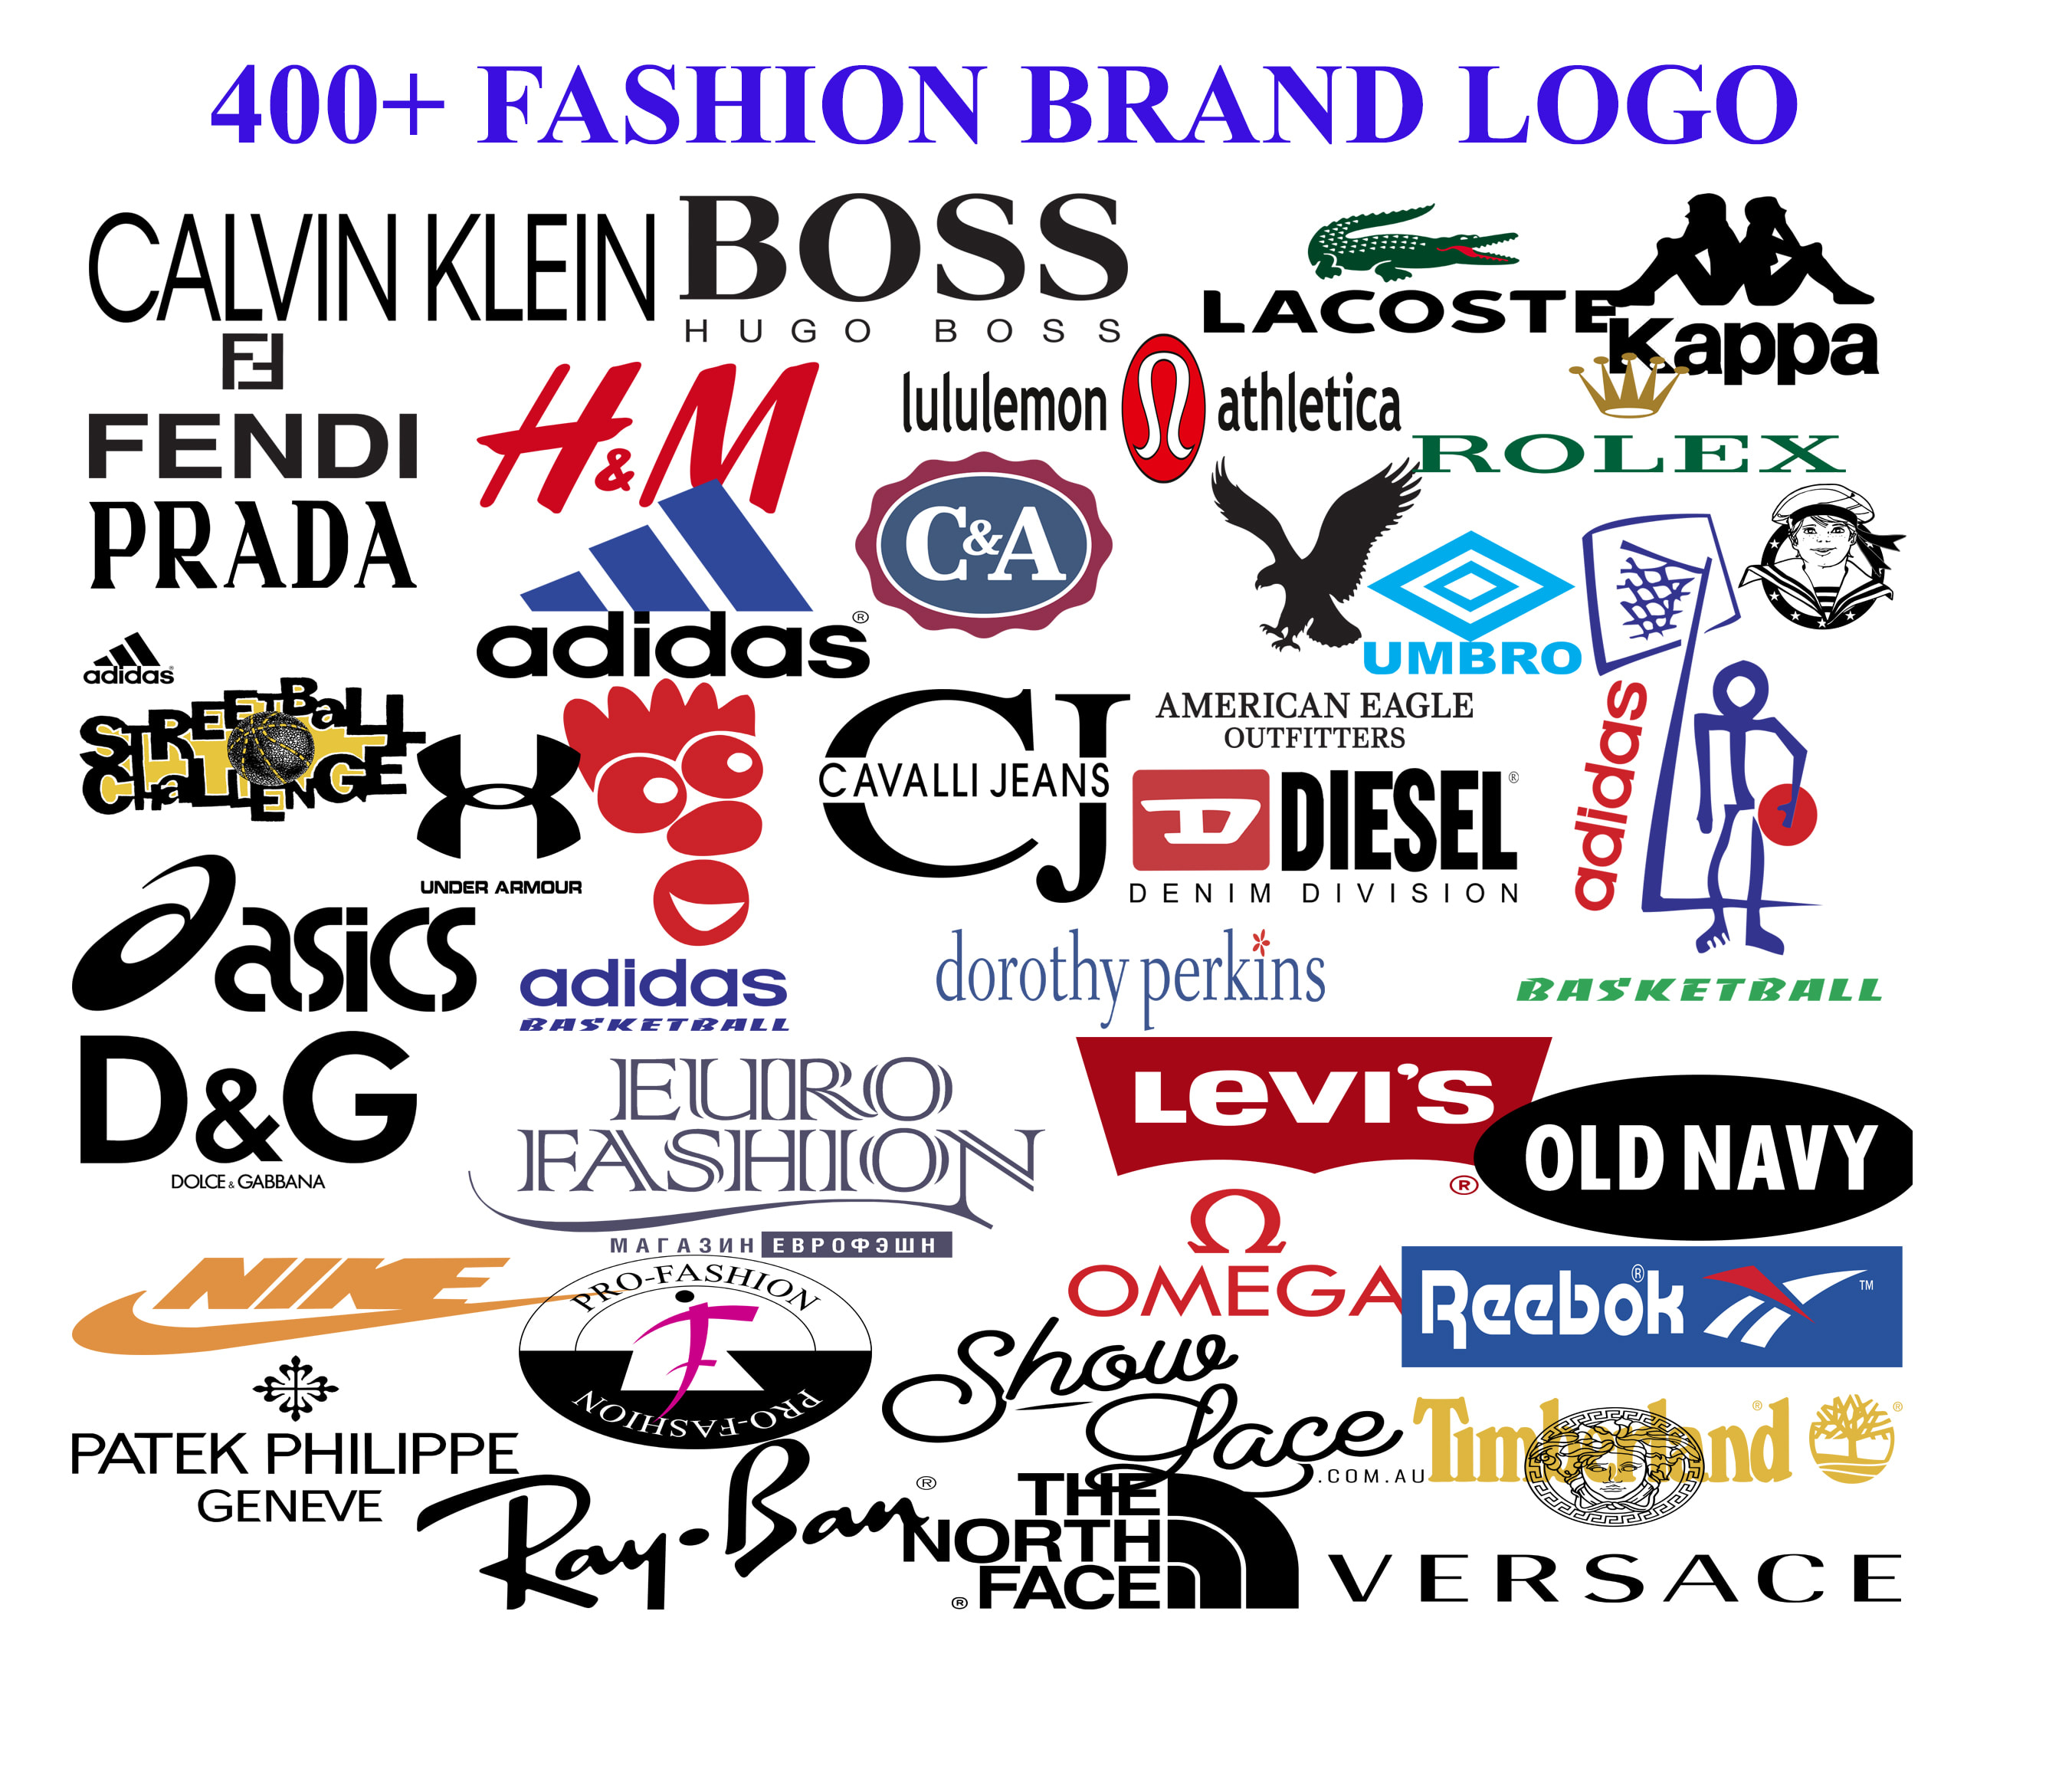 World's Fashion Brands Logos in SVG Vector and PNG File Format 